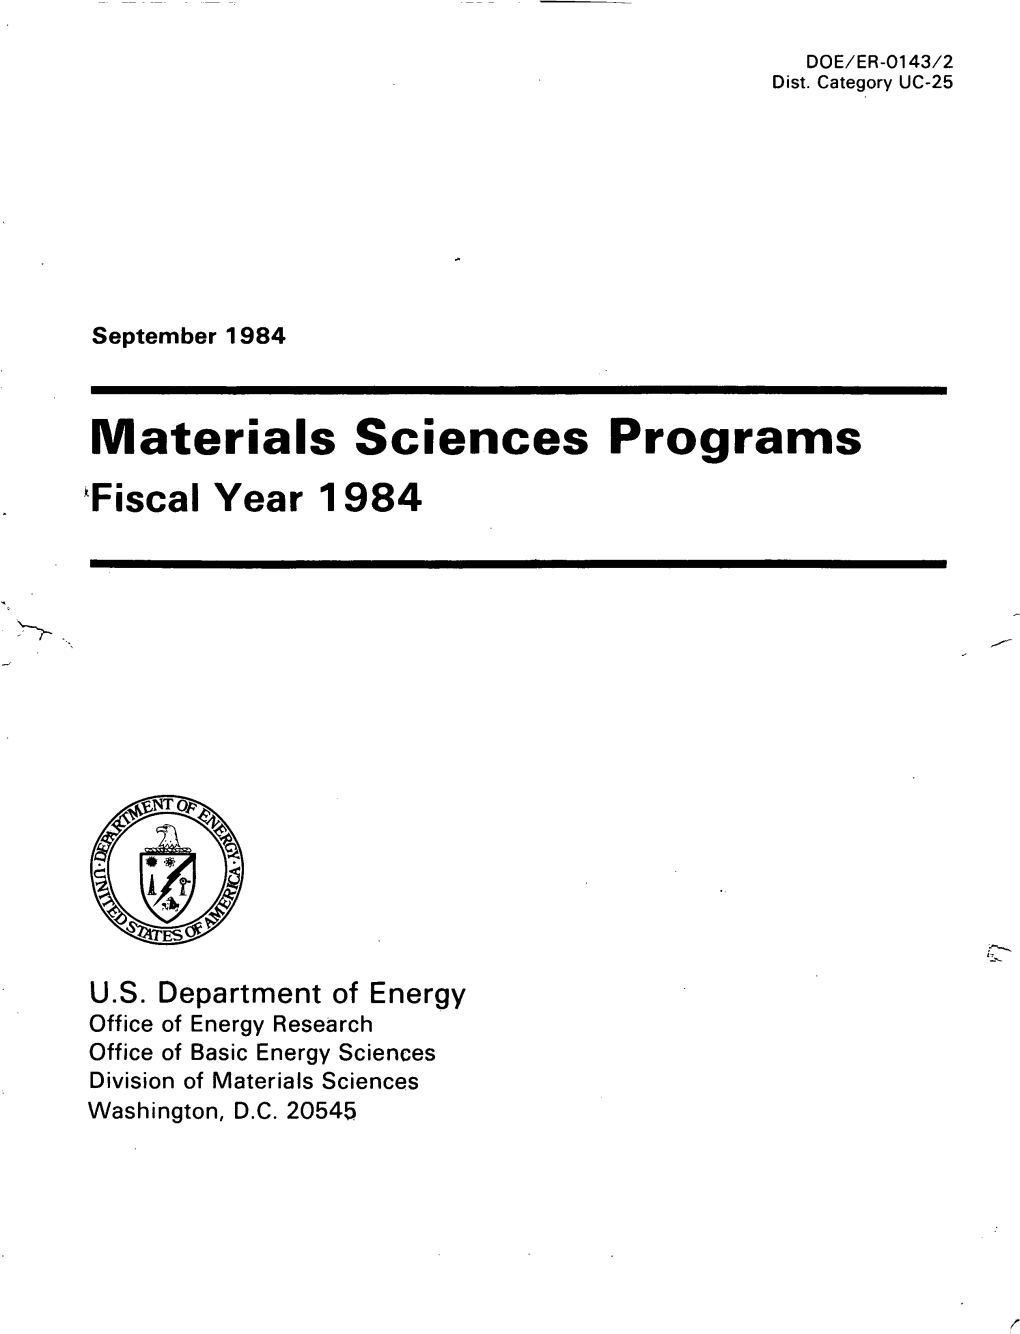 Materials Sciences Programs Fiscal Year 1984